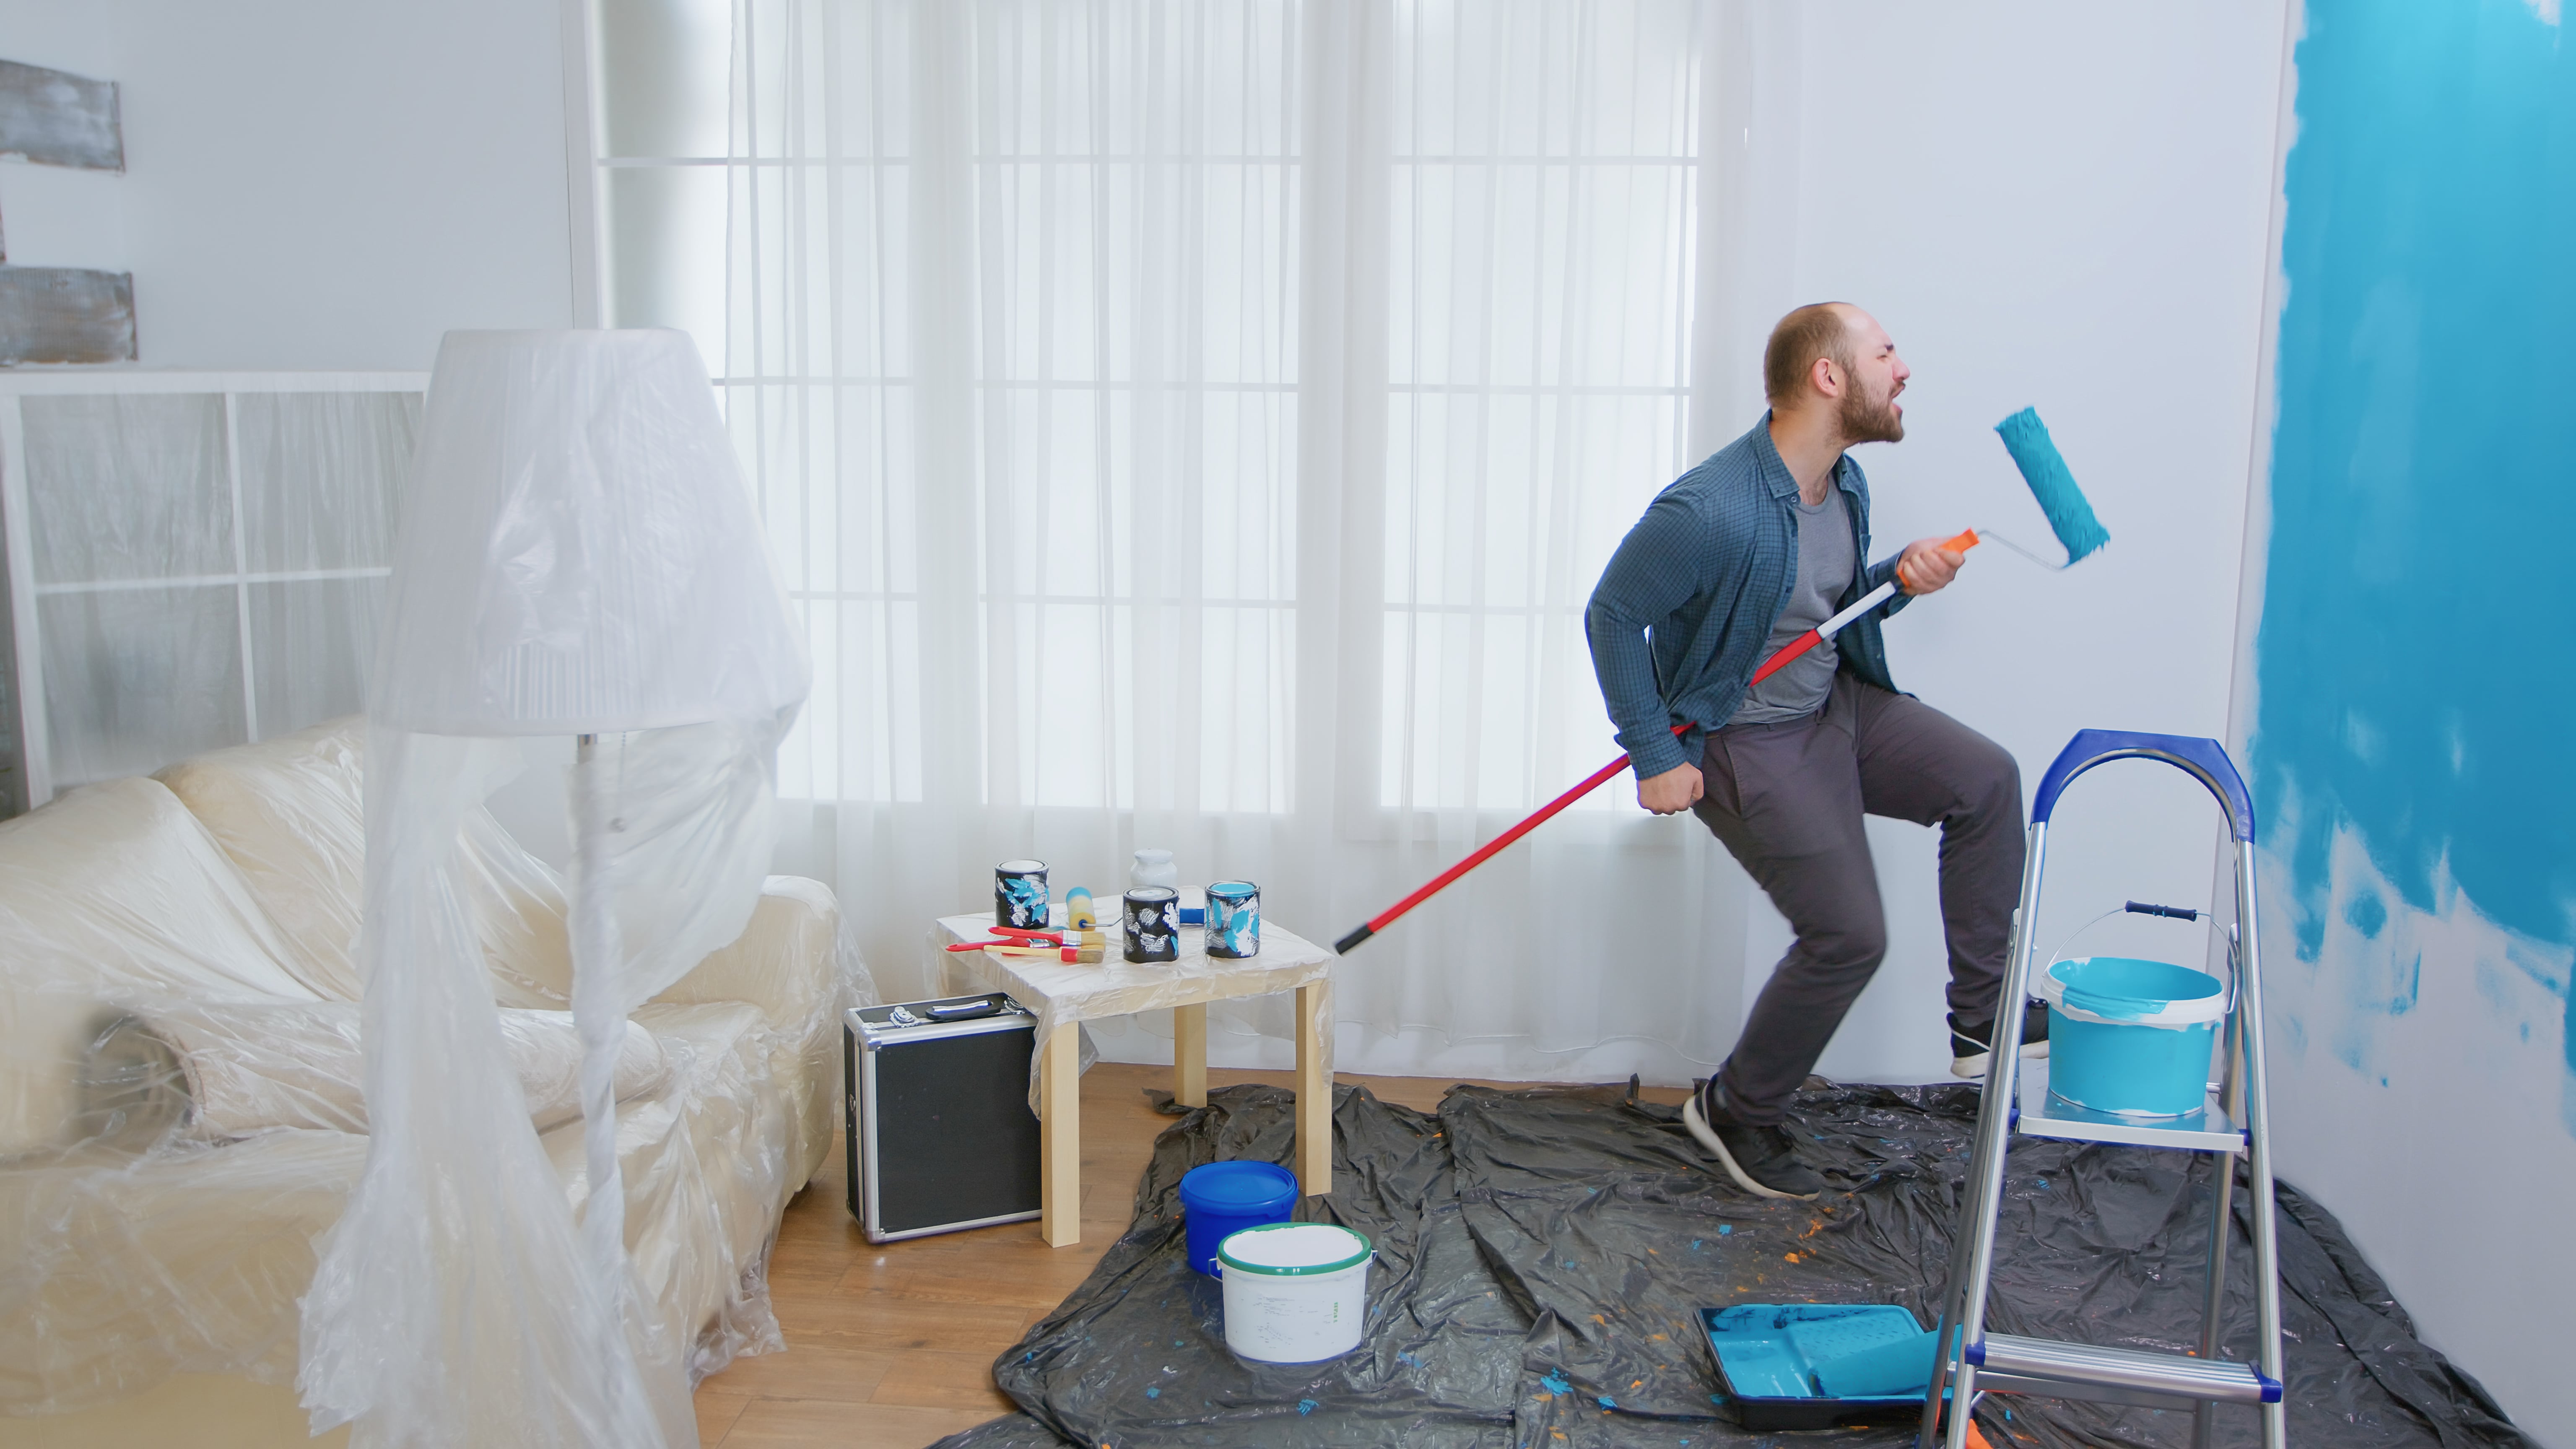 repairman-during-home-construction-using-roller-brush-as-guitar-guy-singing-while-renovating-house-apartment-redecoration-home-construction-while-renovating-improving-repair-decorating-min.jpg